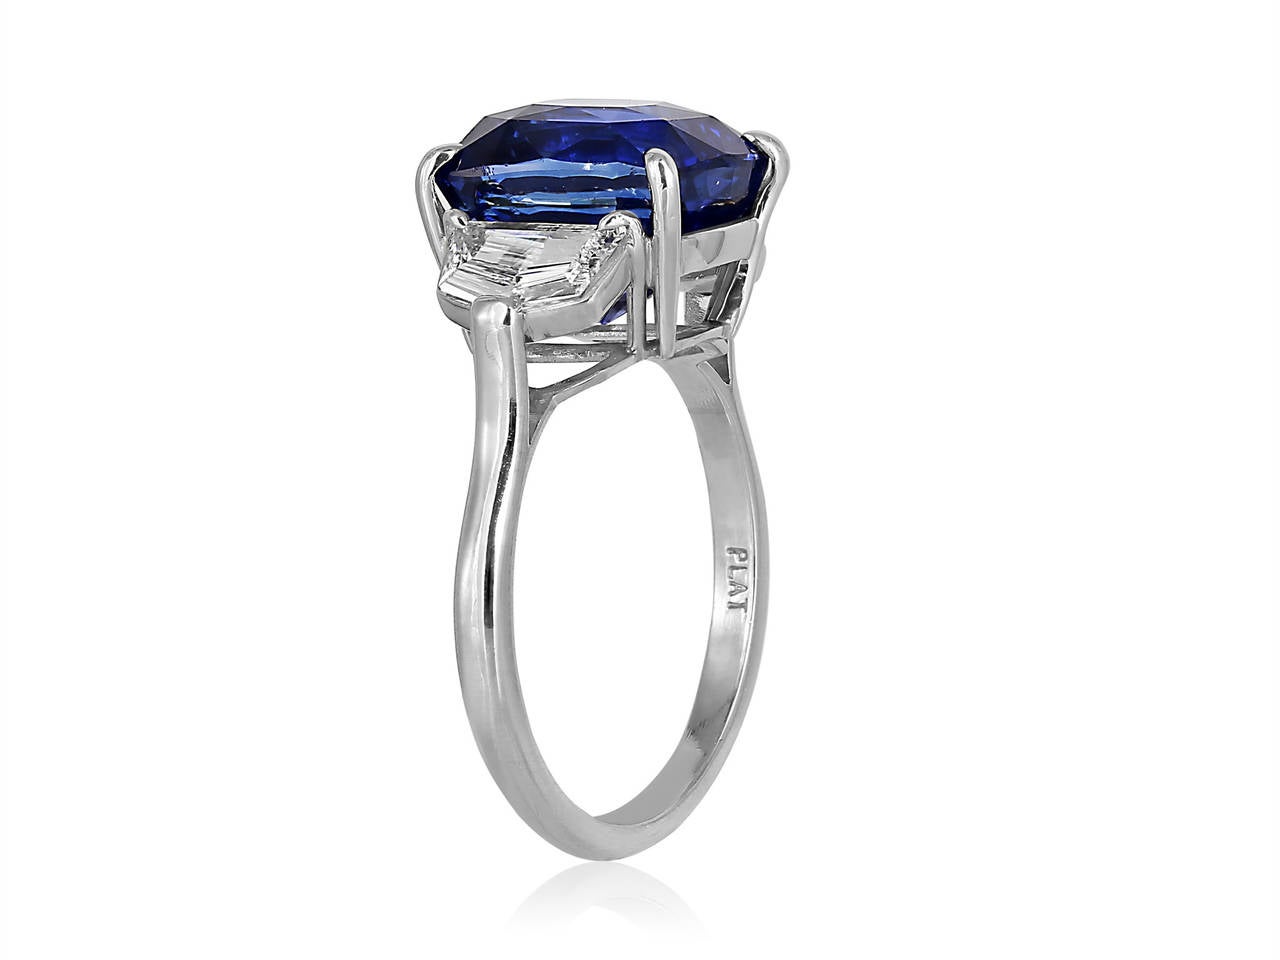 Platinum 3 stone ring consisting of 1 cushion cut sapphire weighing 6.19 carats, measuring 10.17 x 8.52 x 7.66mm with GIA certificate #12960342, the center stone is flanked by 2 step cut half moon shaped diamonds having a total weight of .71 carats.